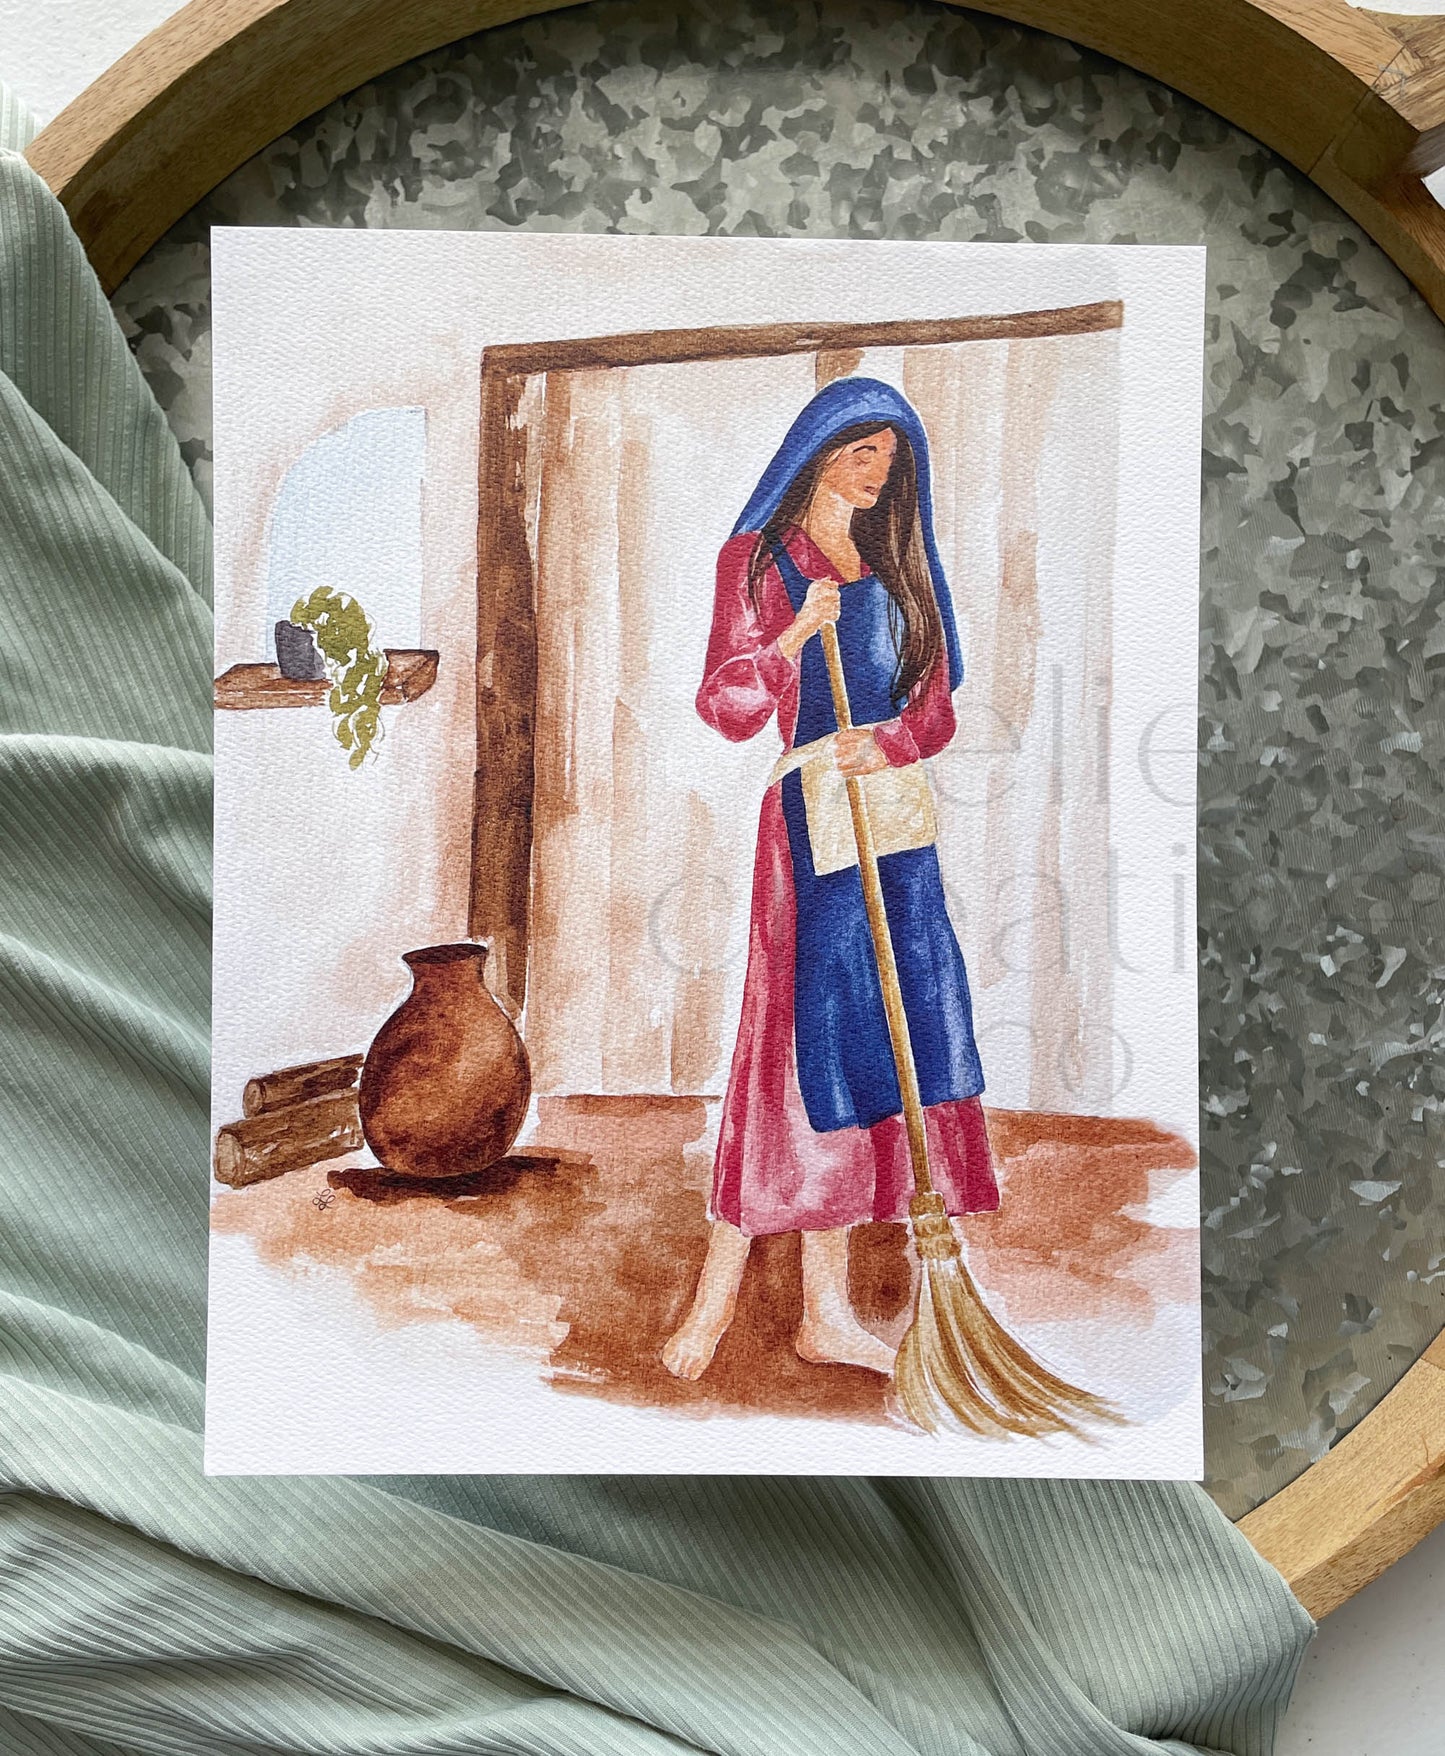 Mary's Work, Sweeping | Print